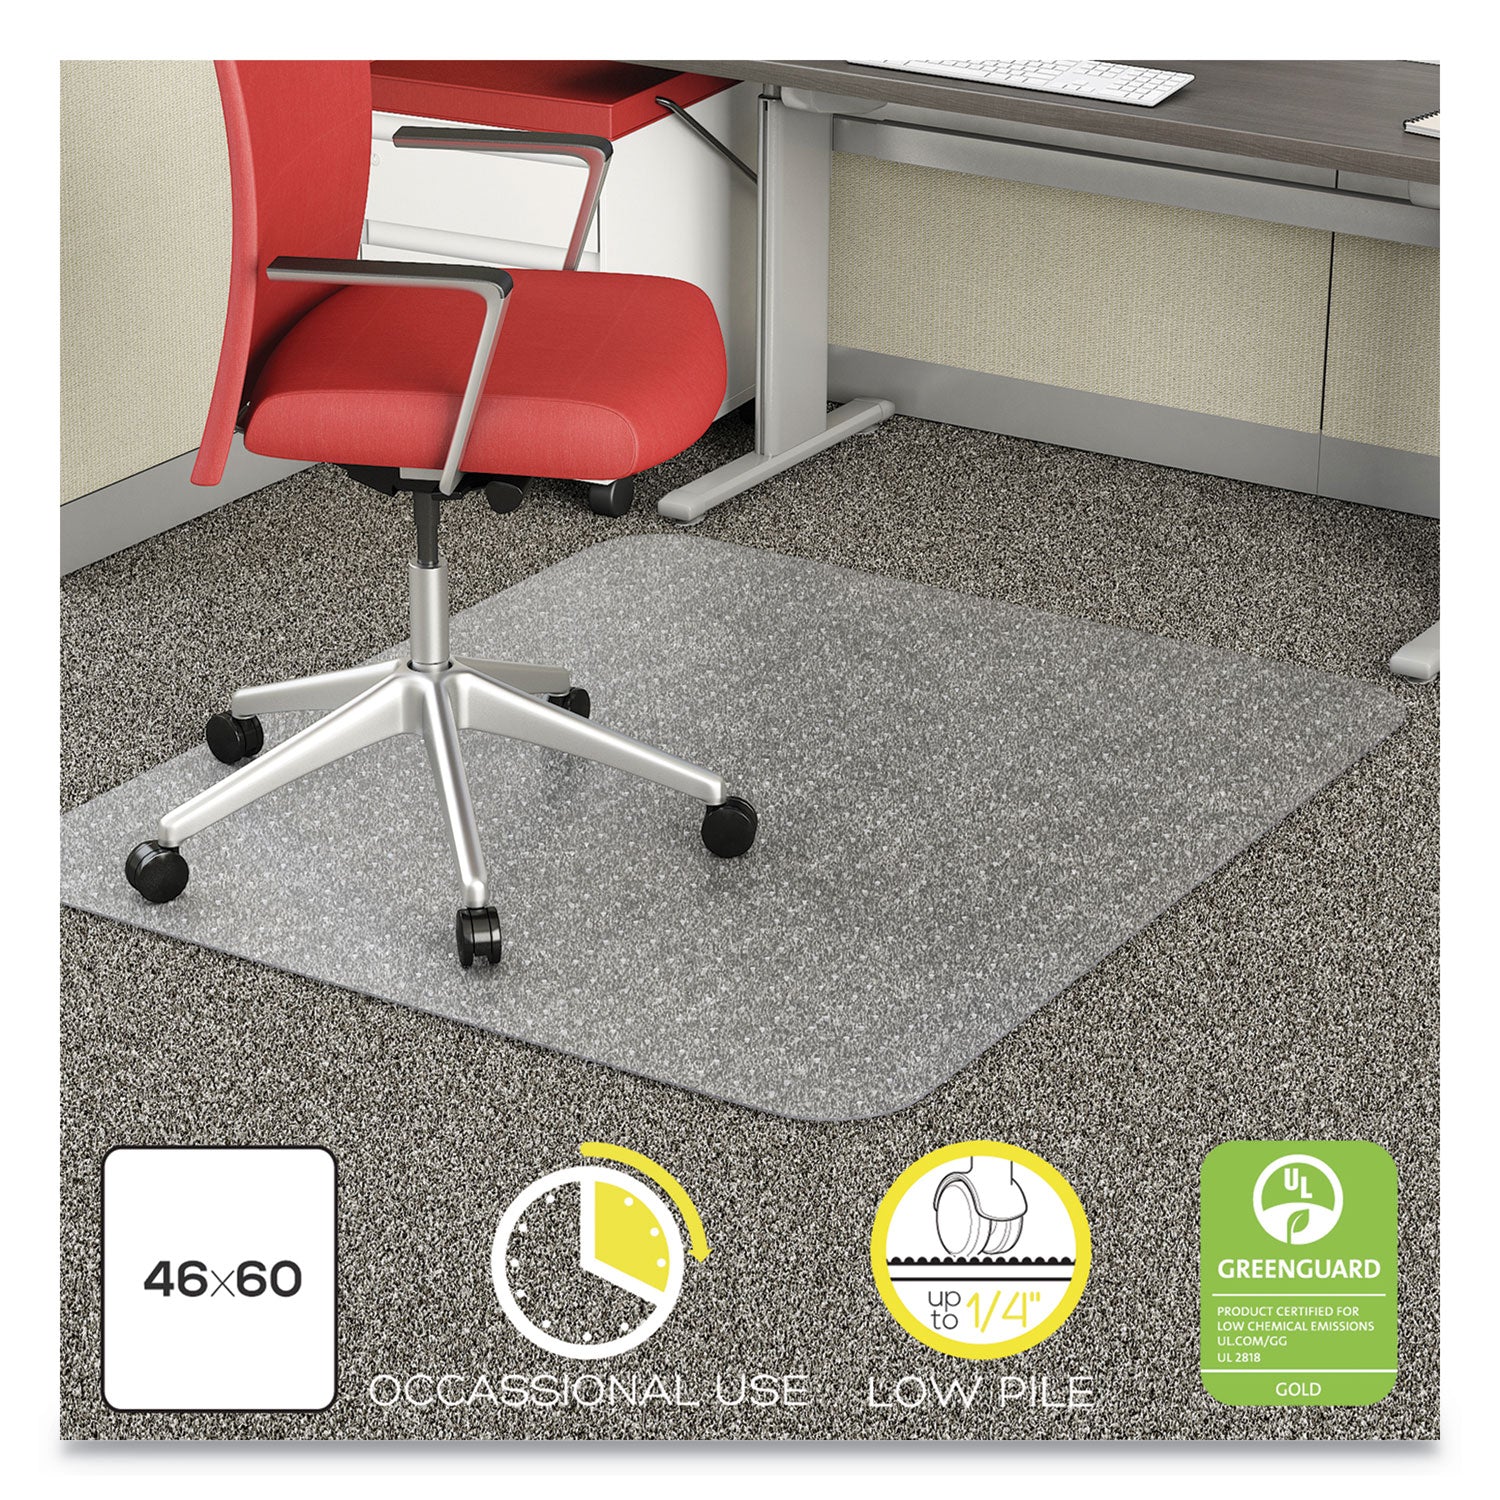 economat-occasional-use-chair-mat-low-pile-carpet-roll-46-x-60-rectangle-clear_defcm11442fcom - 1